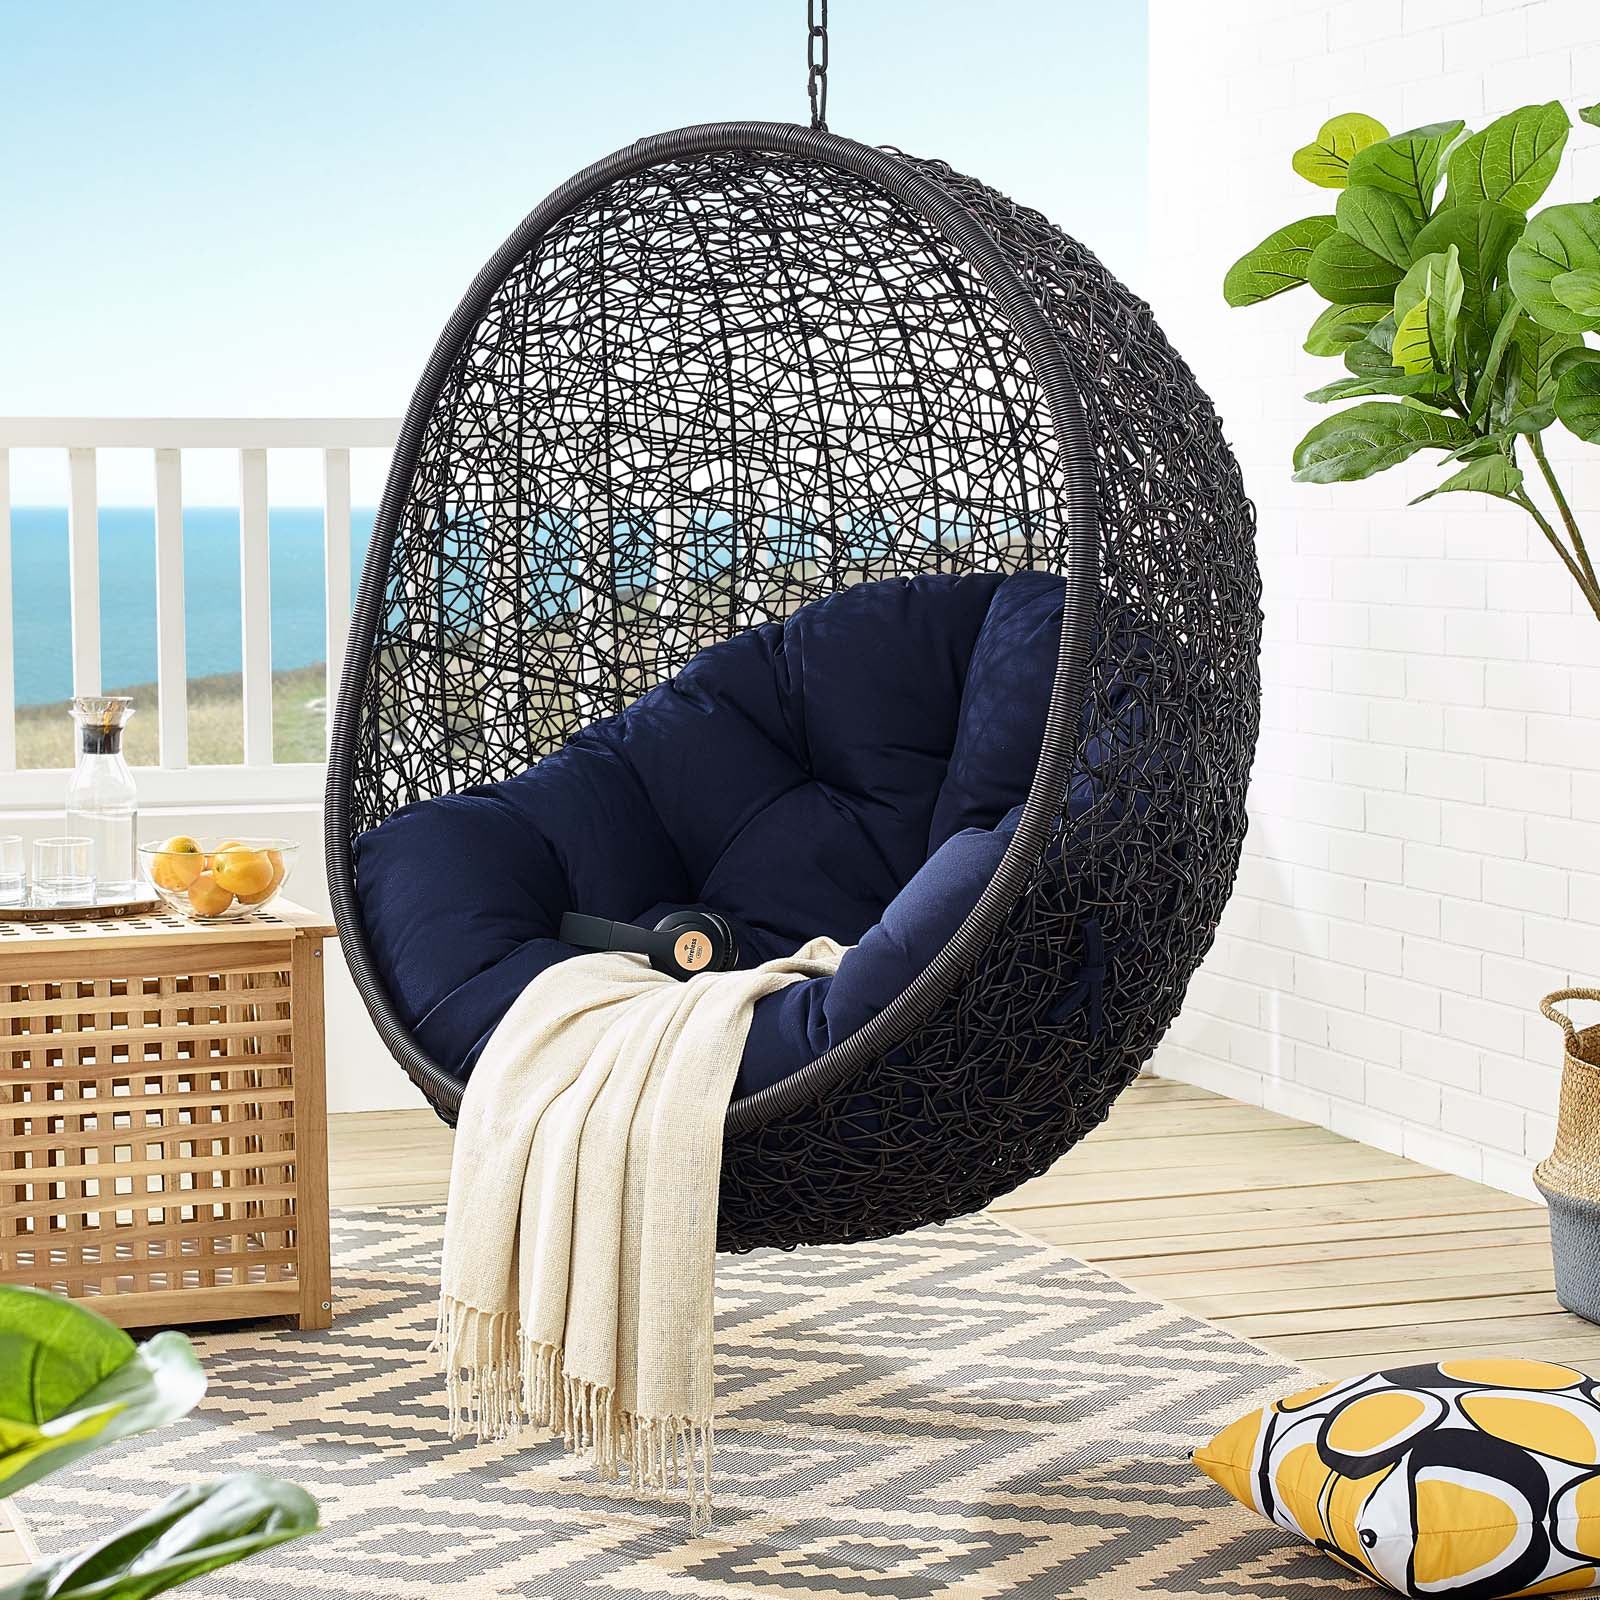 Encase Sunbrella® Fabric Swing Outdoor Patio Lounge Chair Without Stand - East Shore Modern Home Furnishings